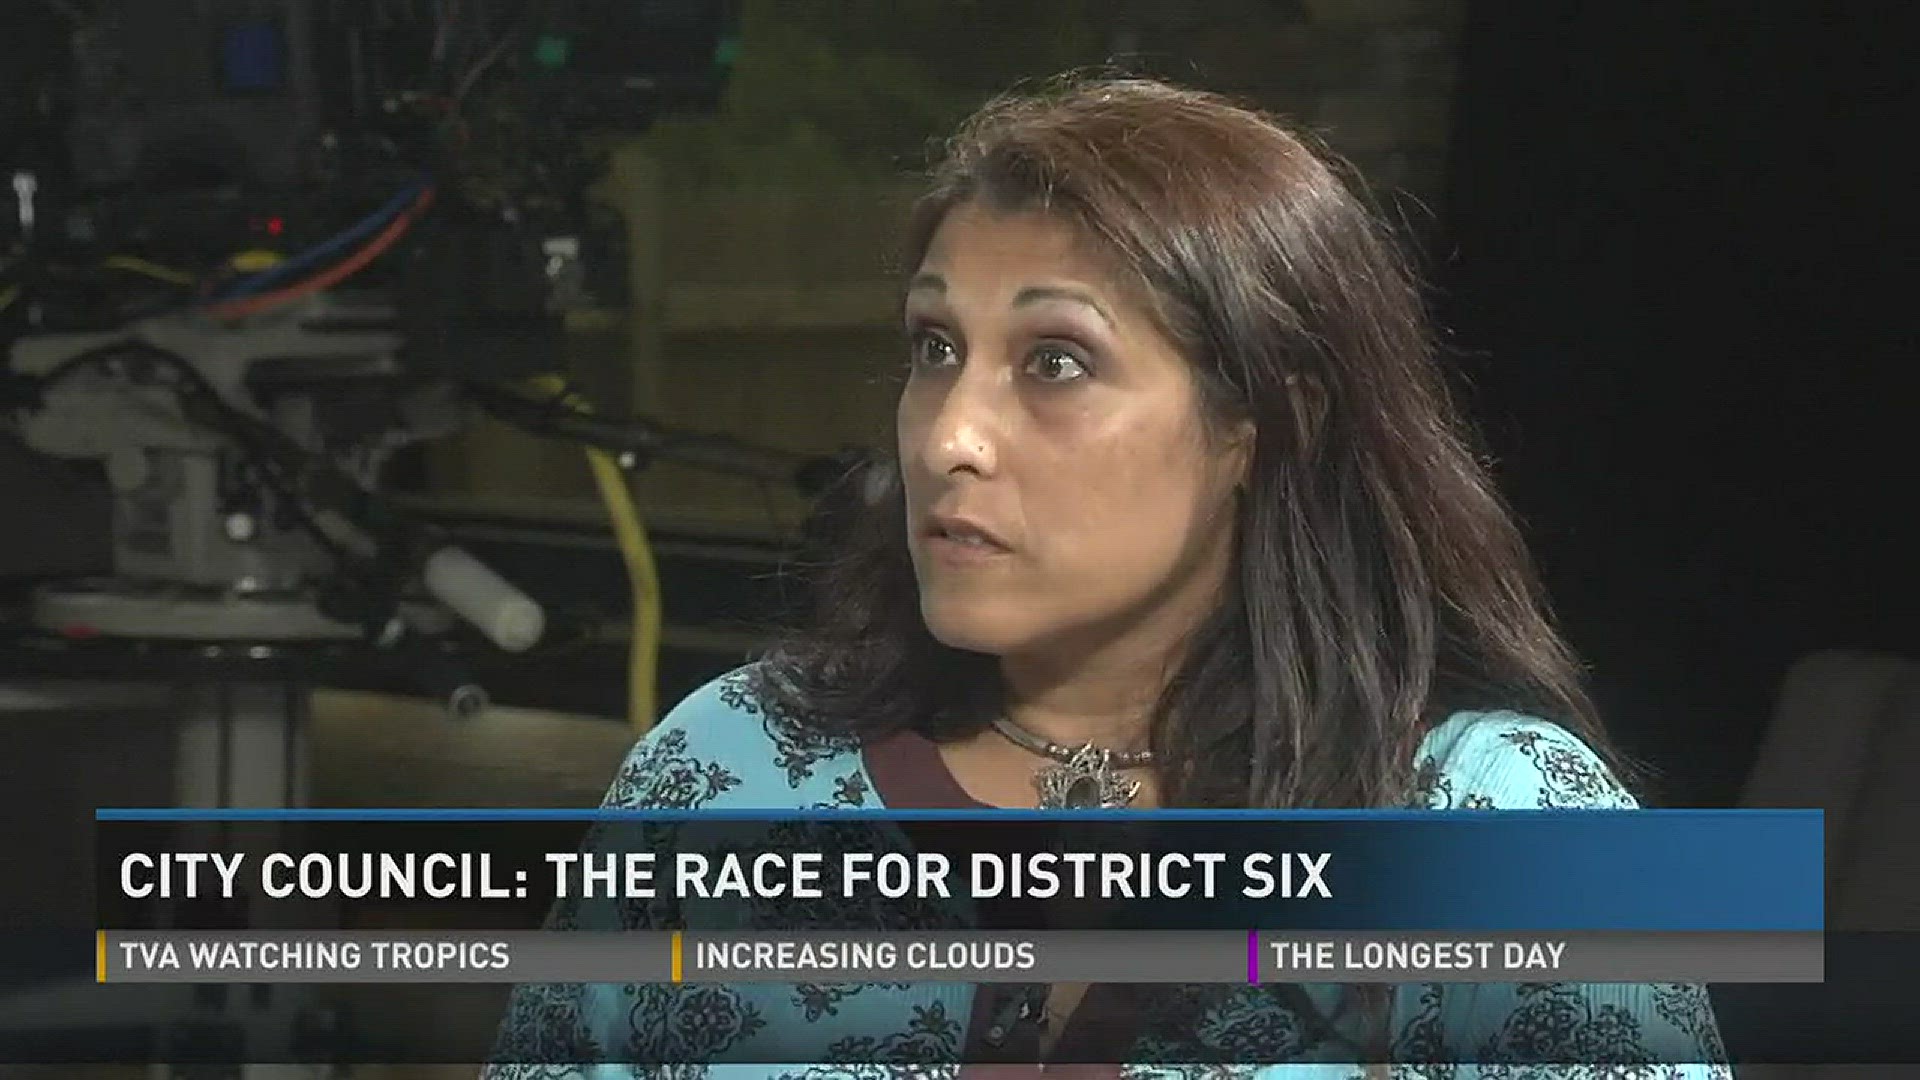 Seema Singh Perez is one of four candidates for the Knoxville City Council District Three seat in the 2017 election.